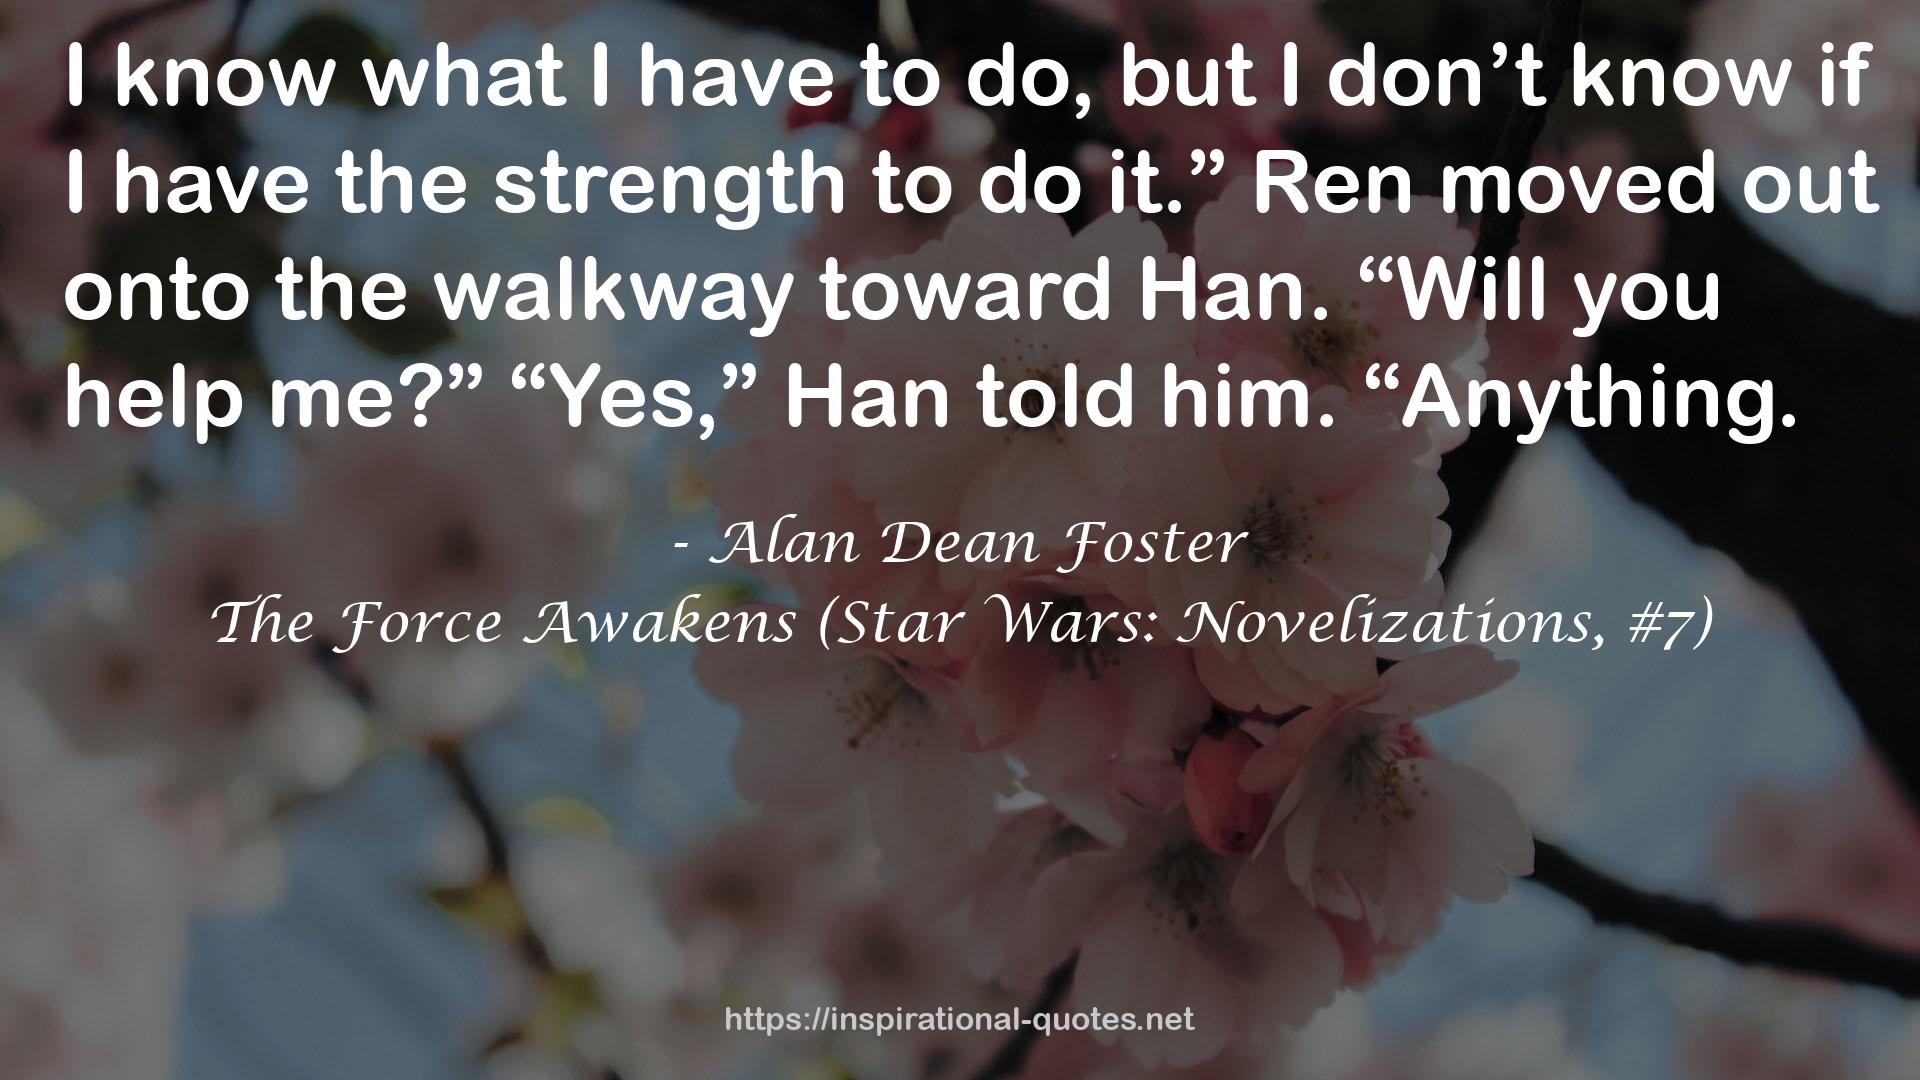 The Force Awakens (Star Wars: Novelizations, #7) QUOTES